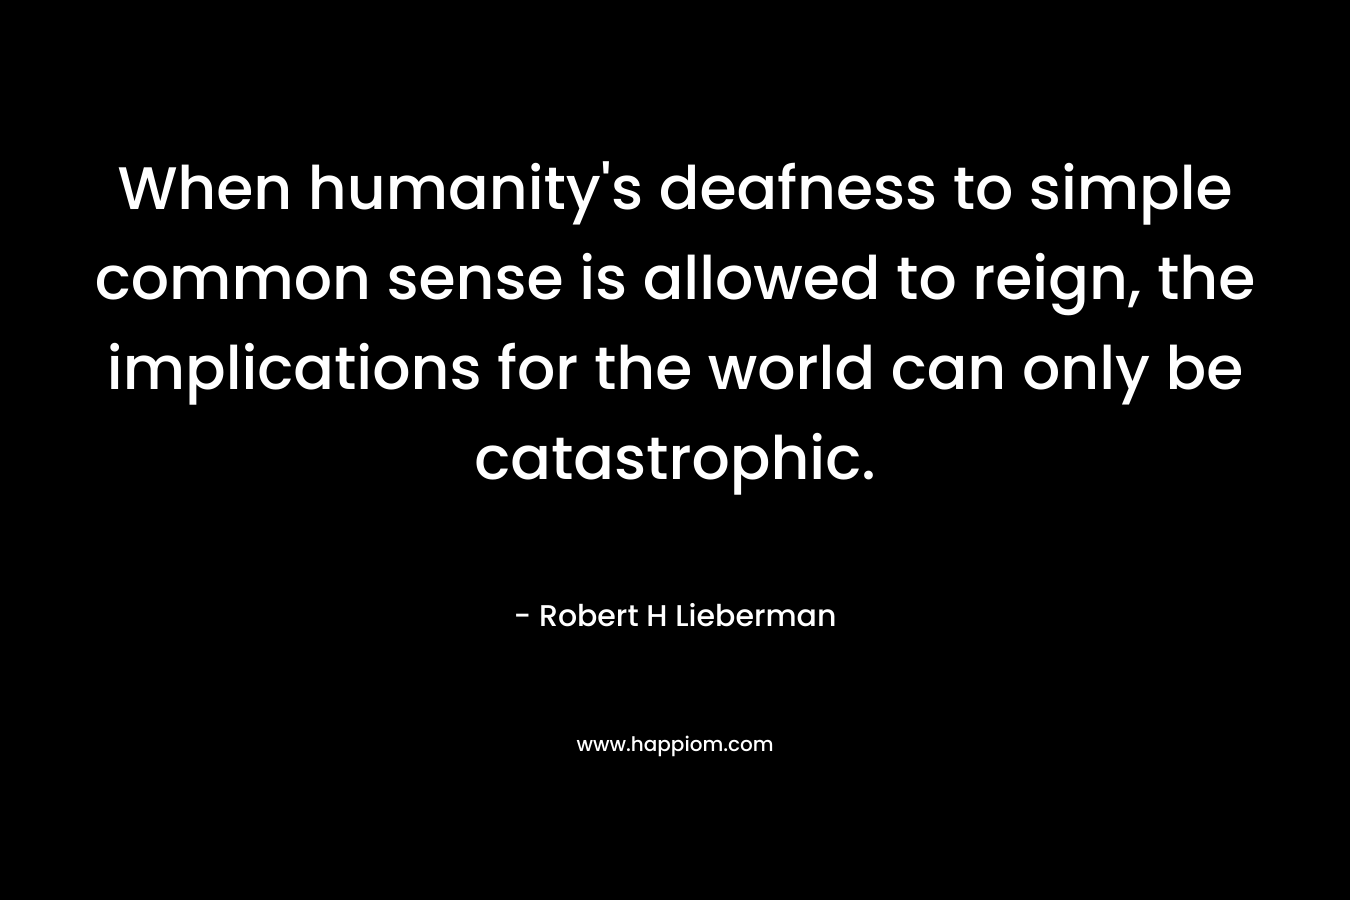 When humanity’s deafness to simple common sense is allowed to reign, the implications for the world can only be catastrophic. – Robert H Lieberman